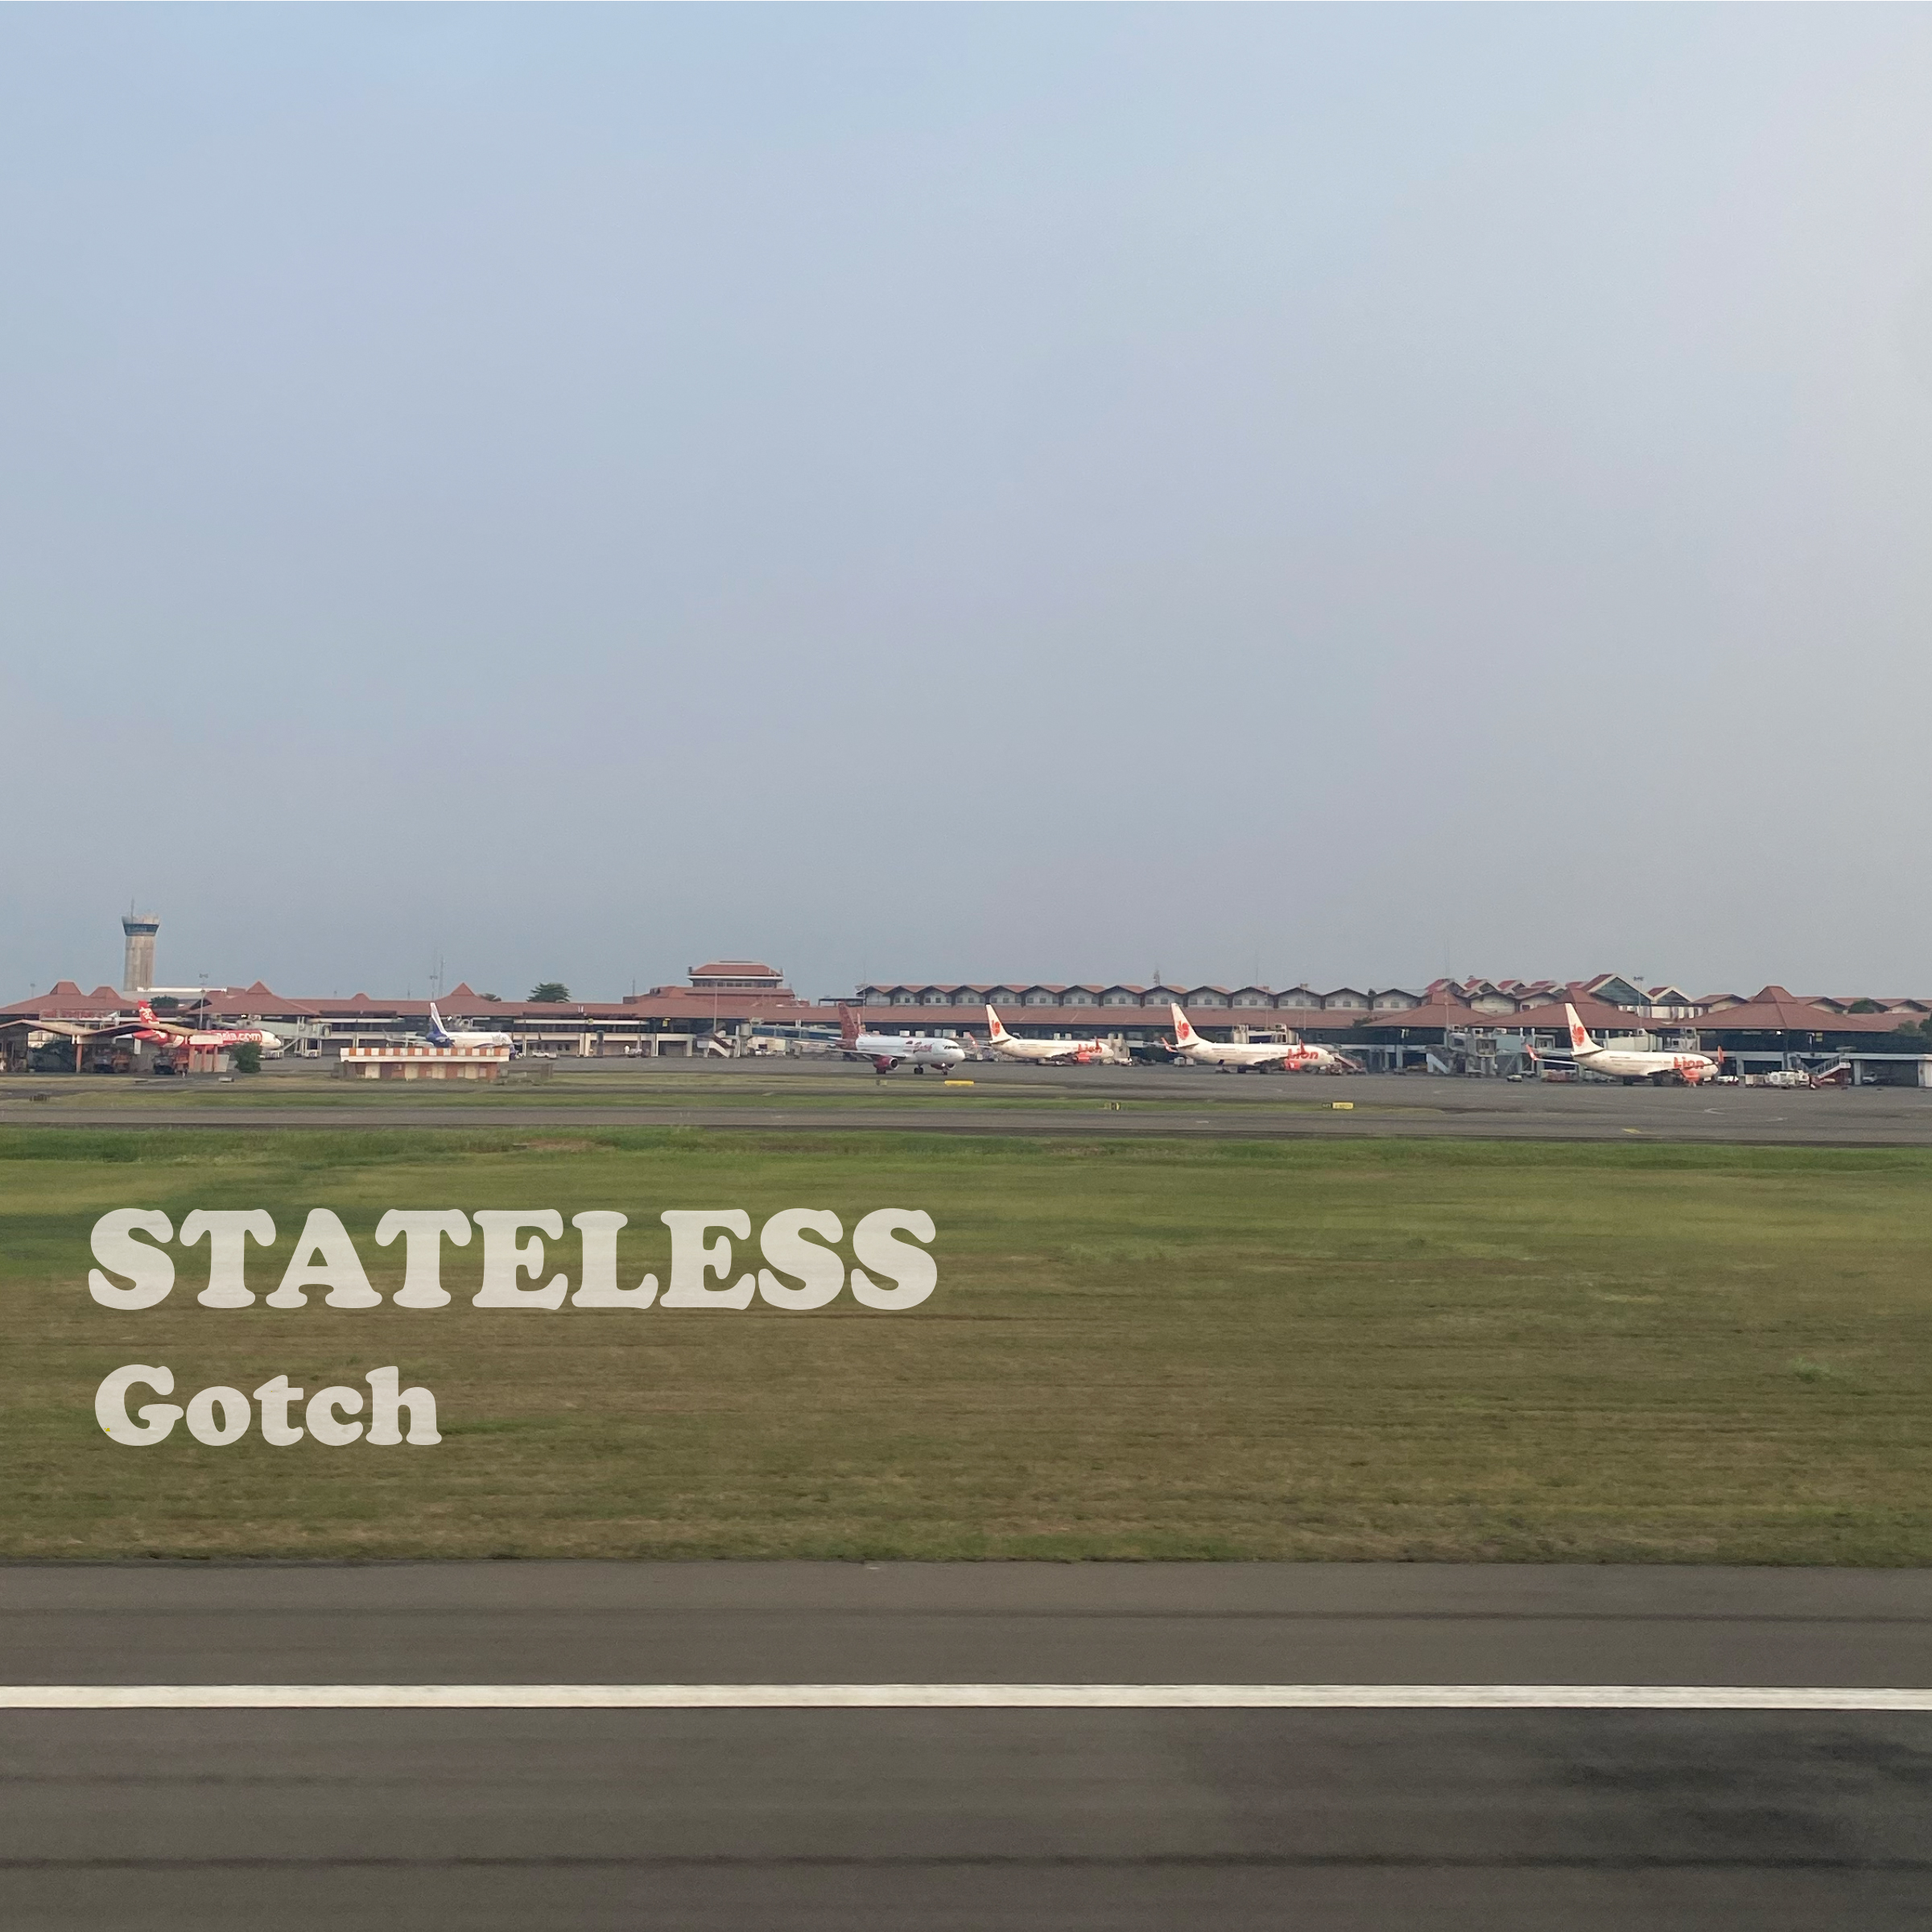 Gotch ‘Stateless’ is out on streaming